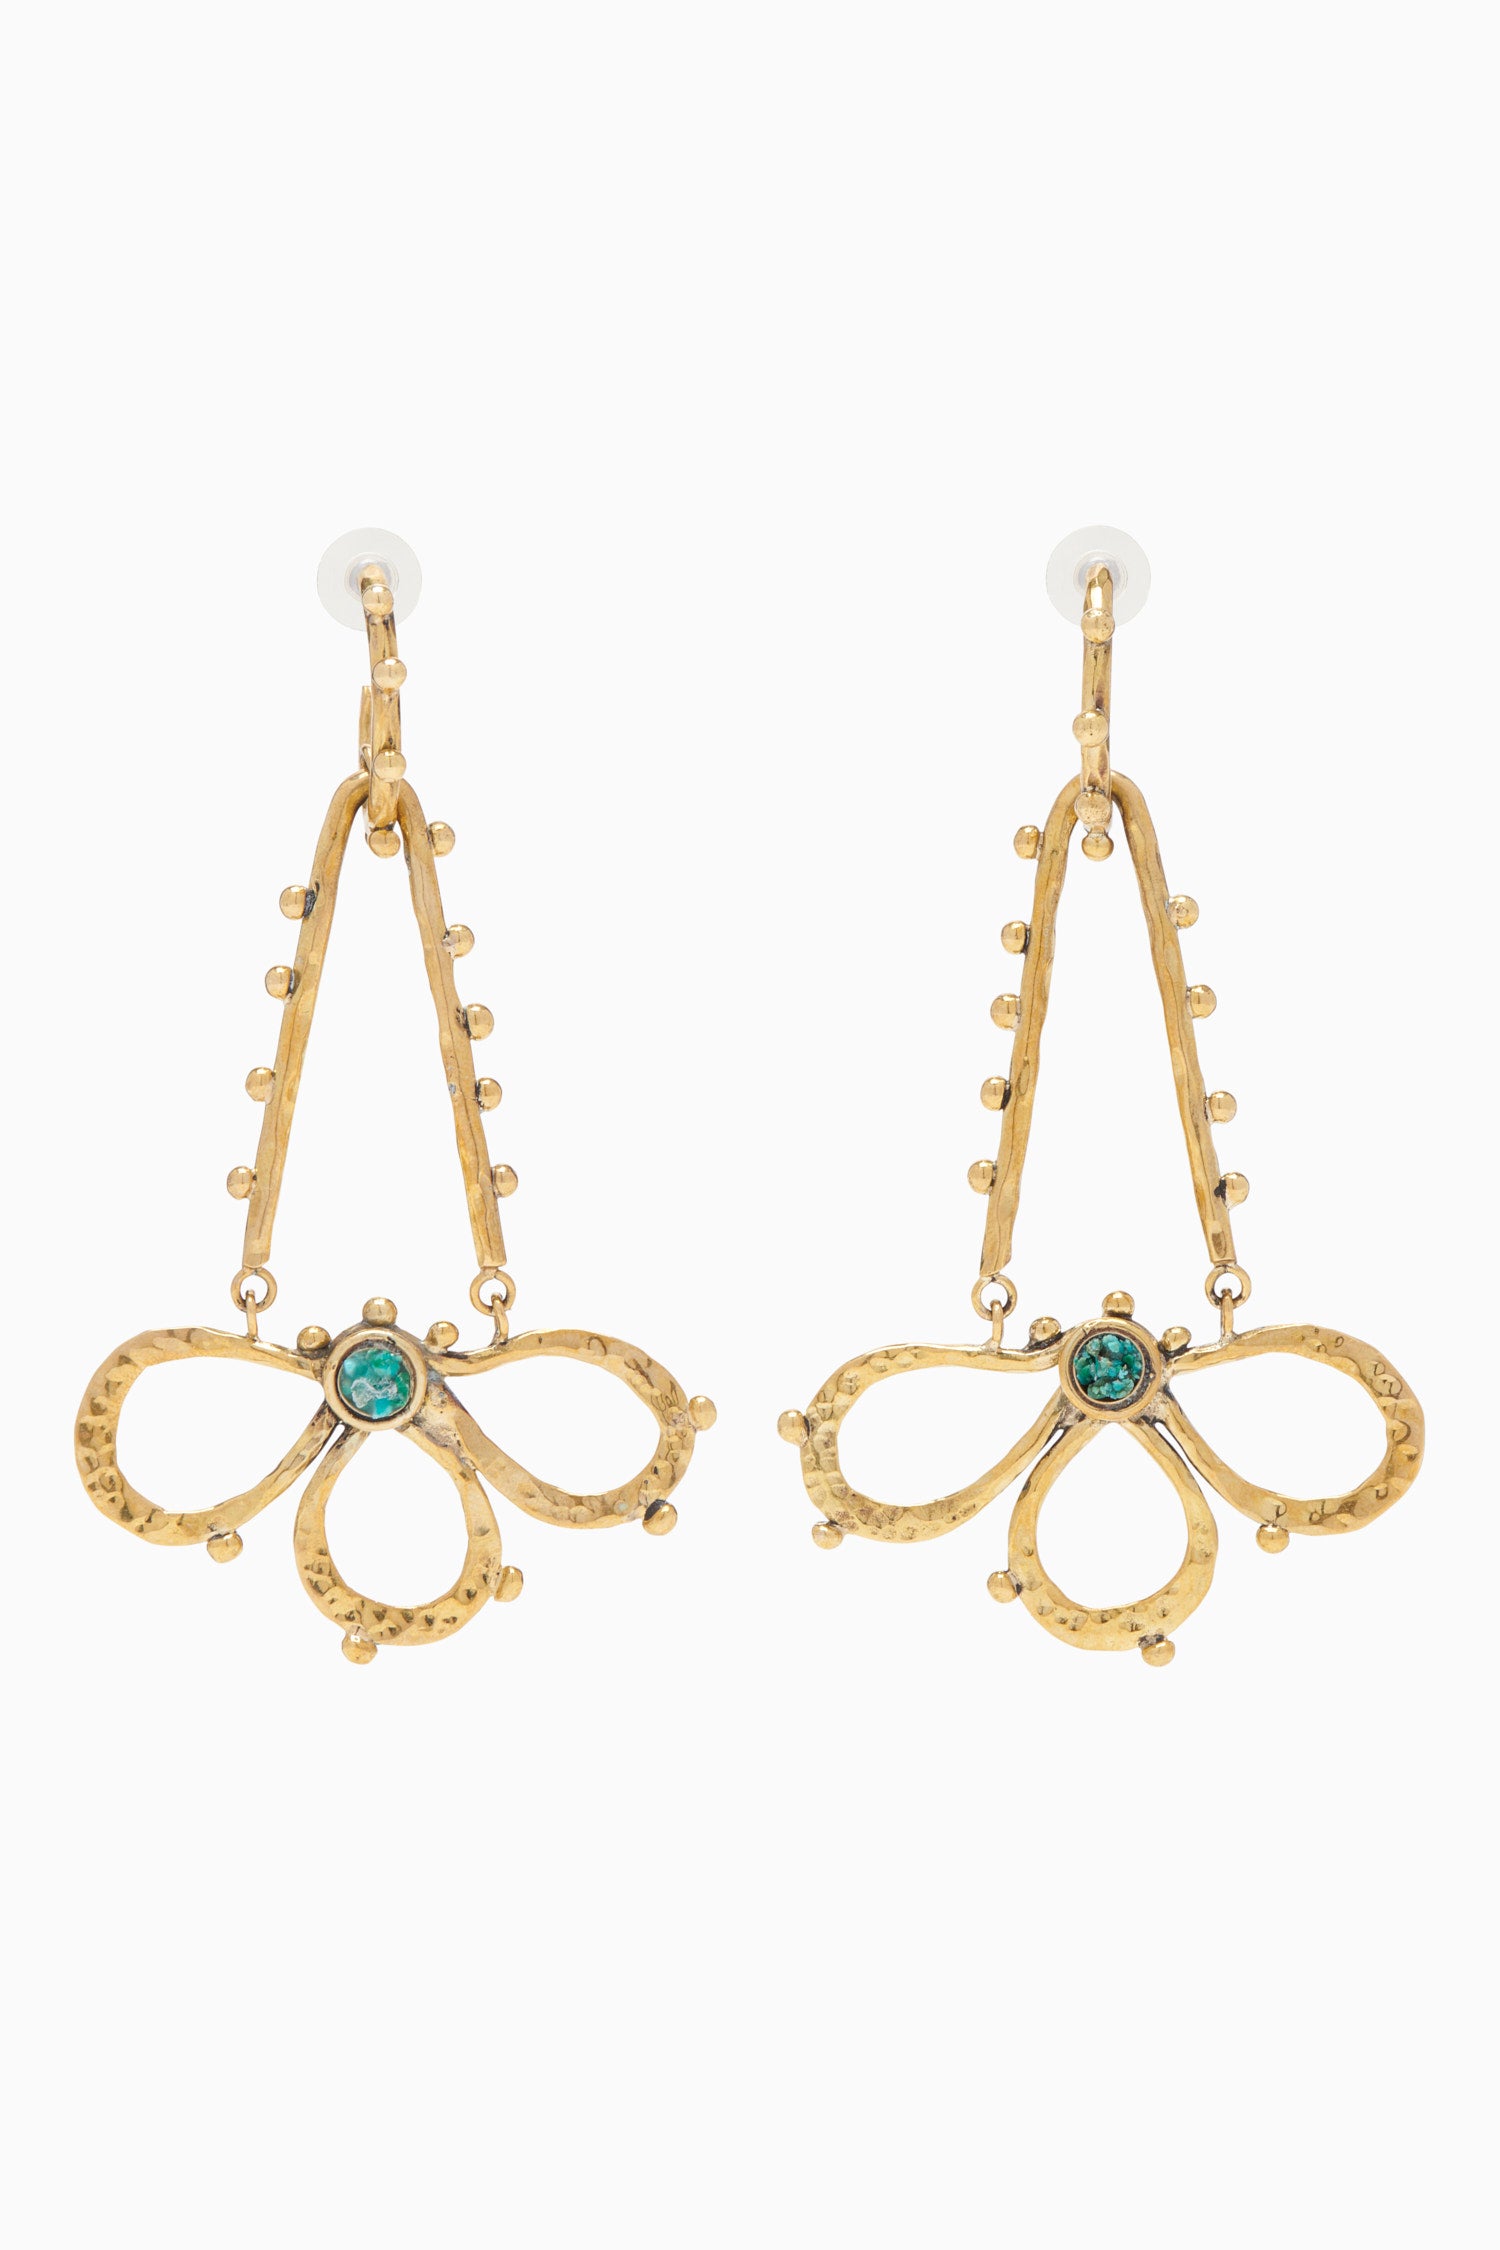 Ulla Johnson Hammered Chain Hoop Flower Drop Earring - Turquoise